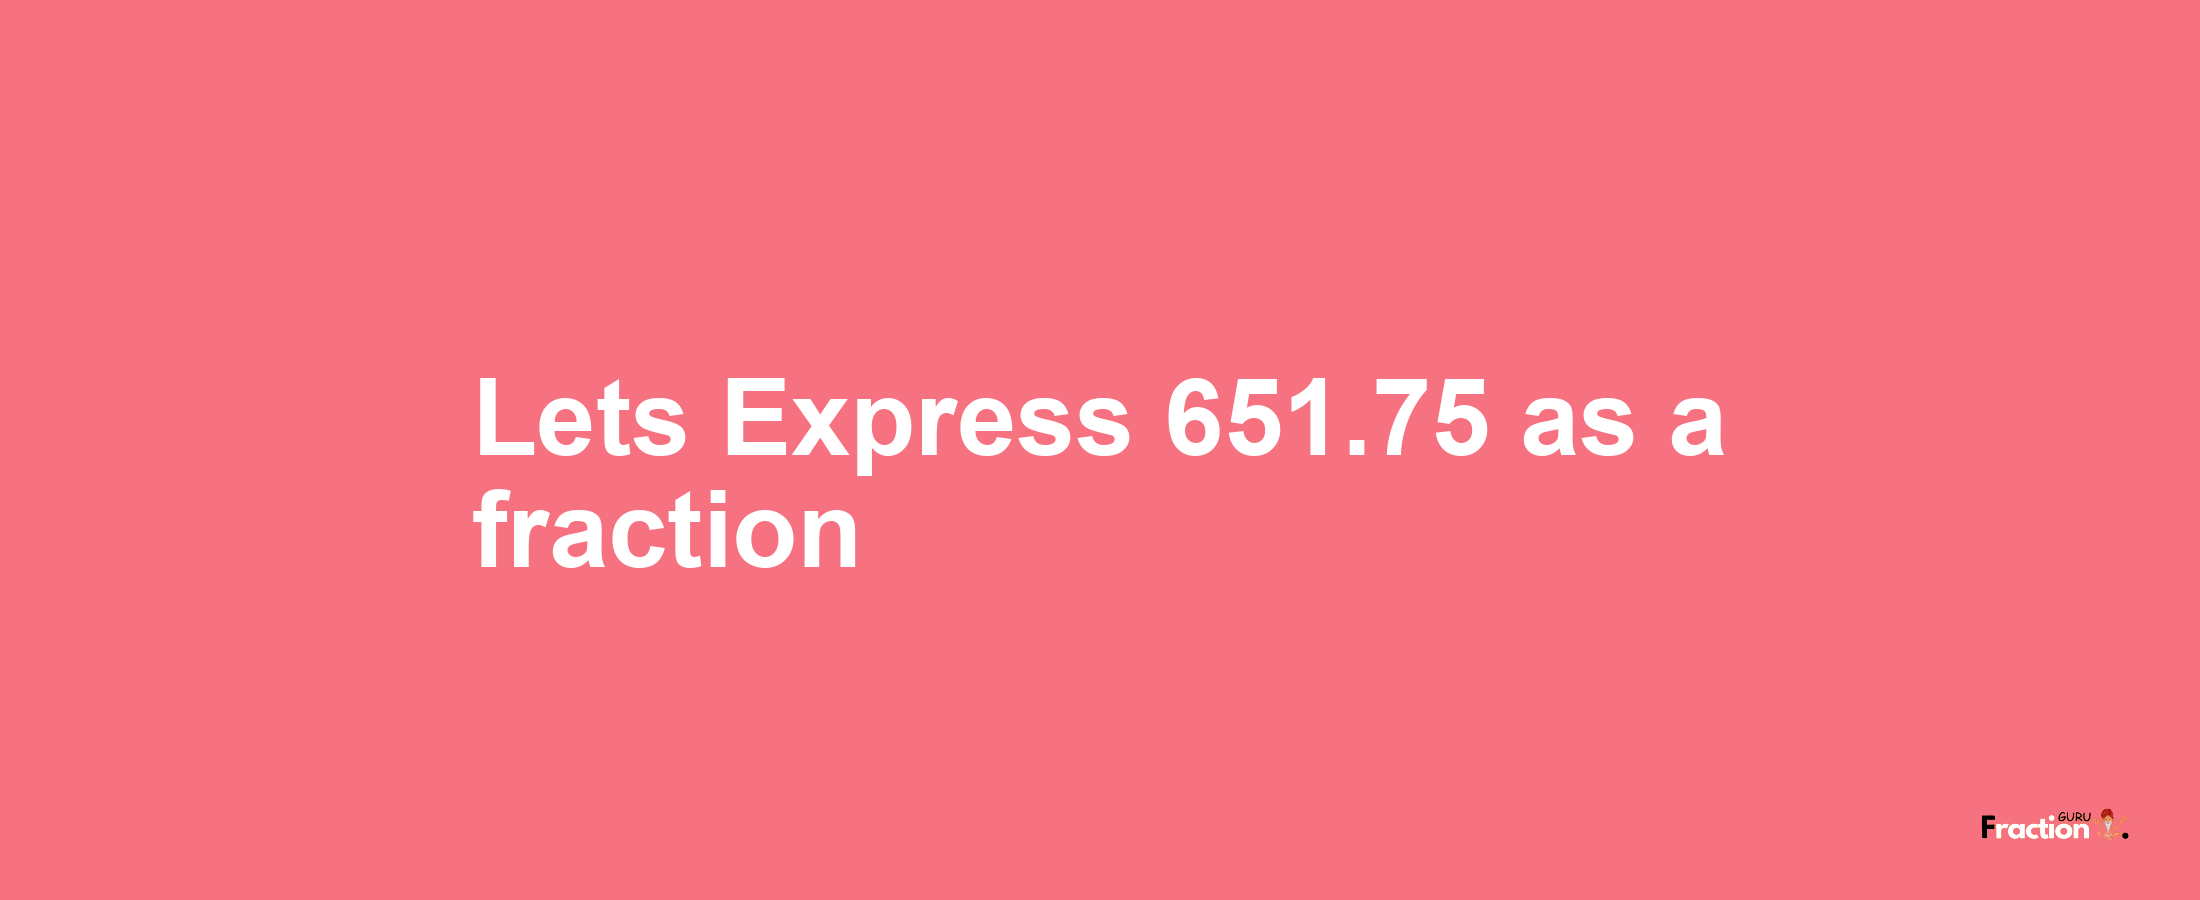 Lets Express 651.75 as afraction